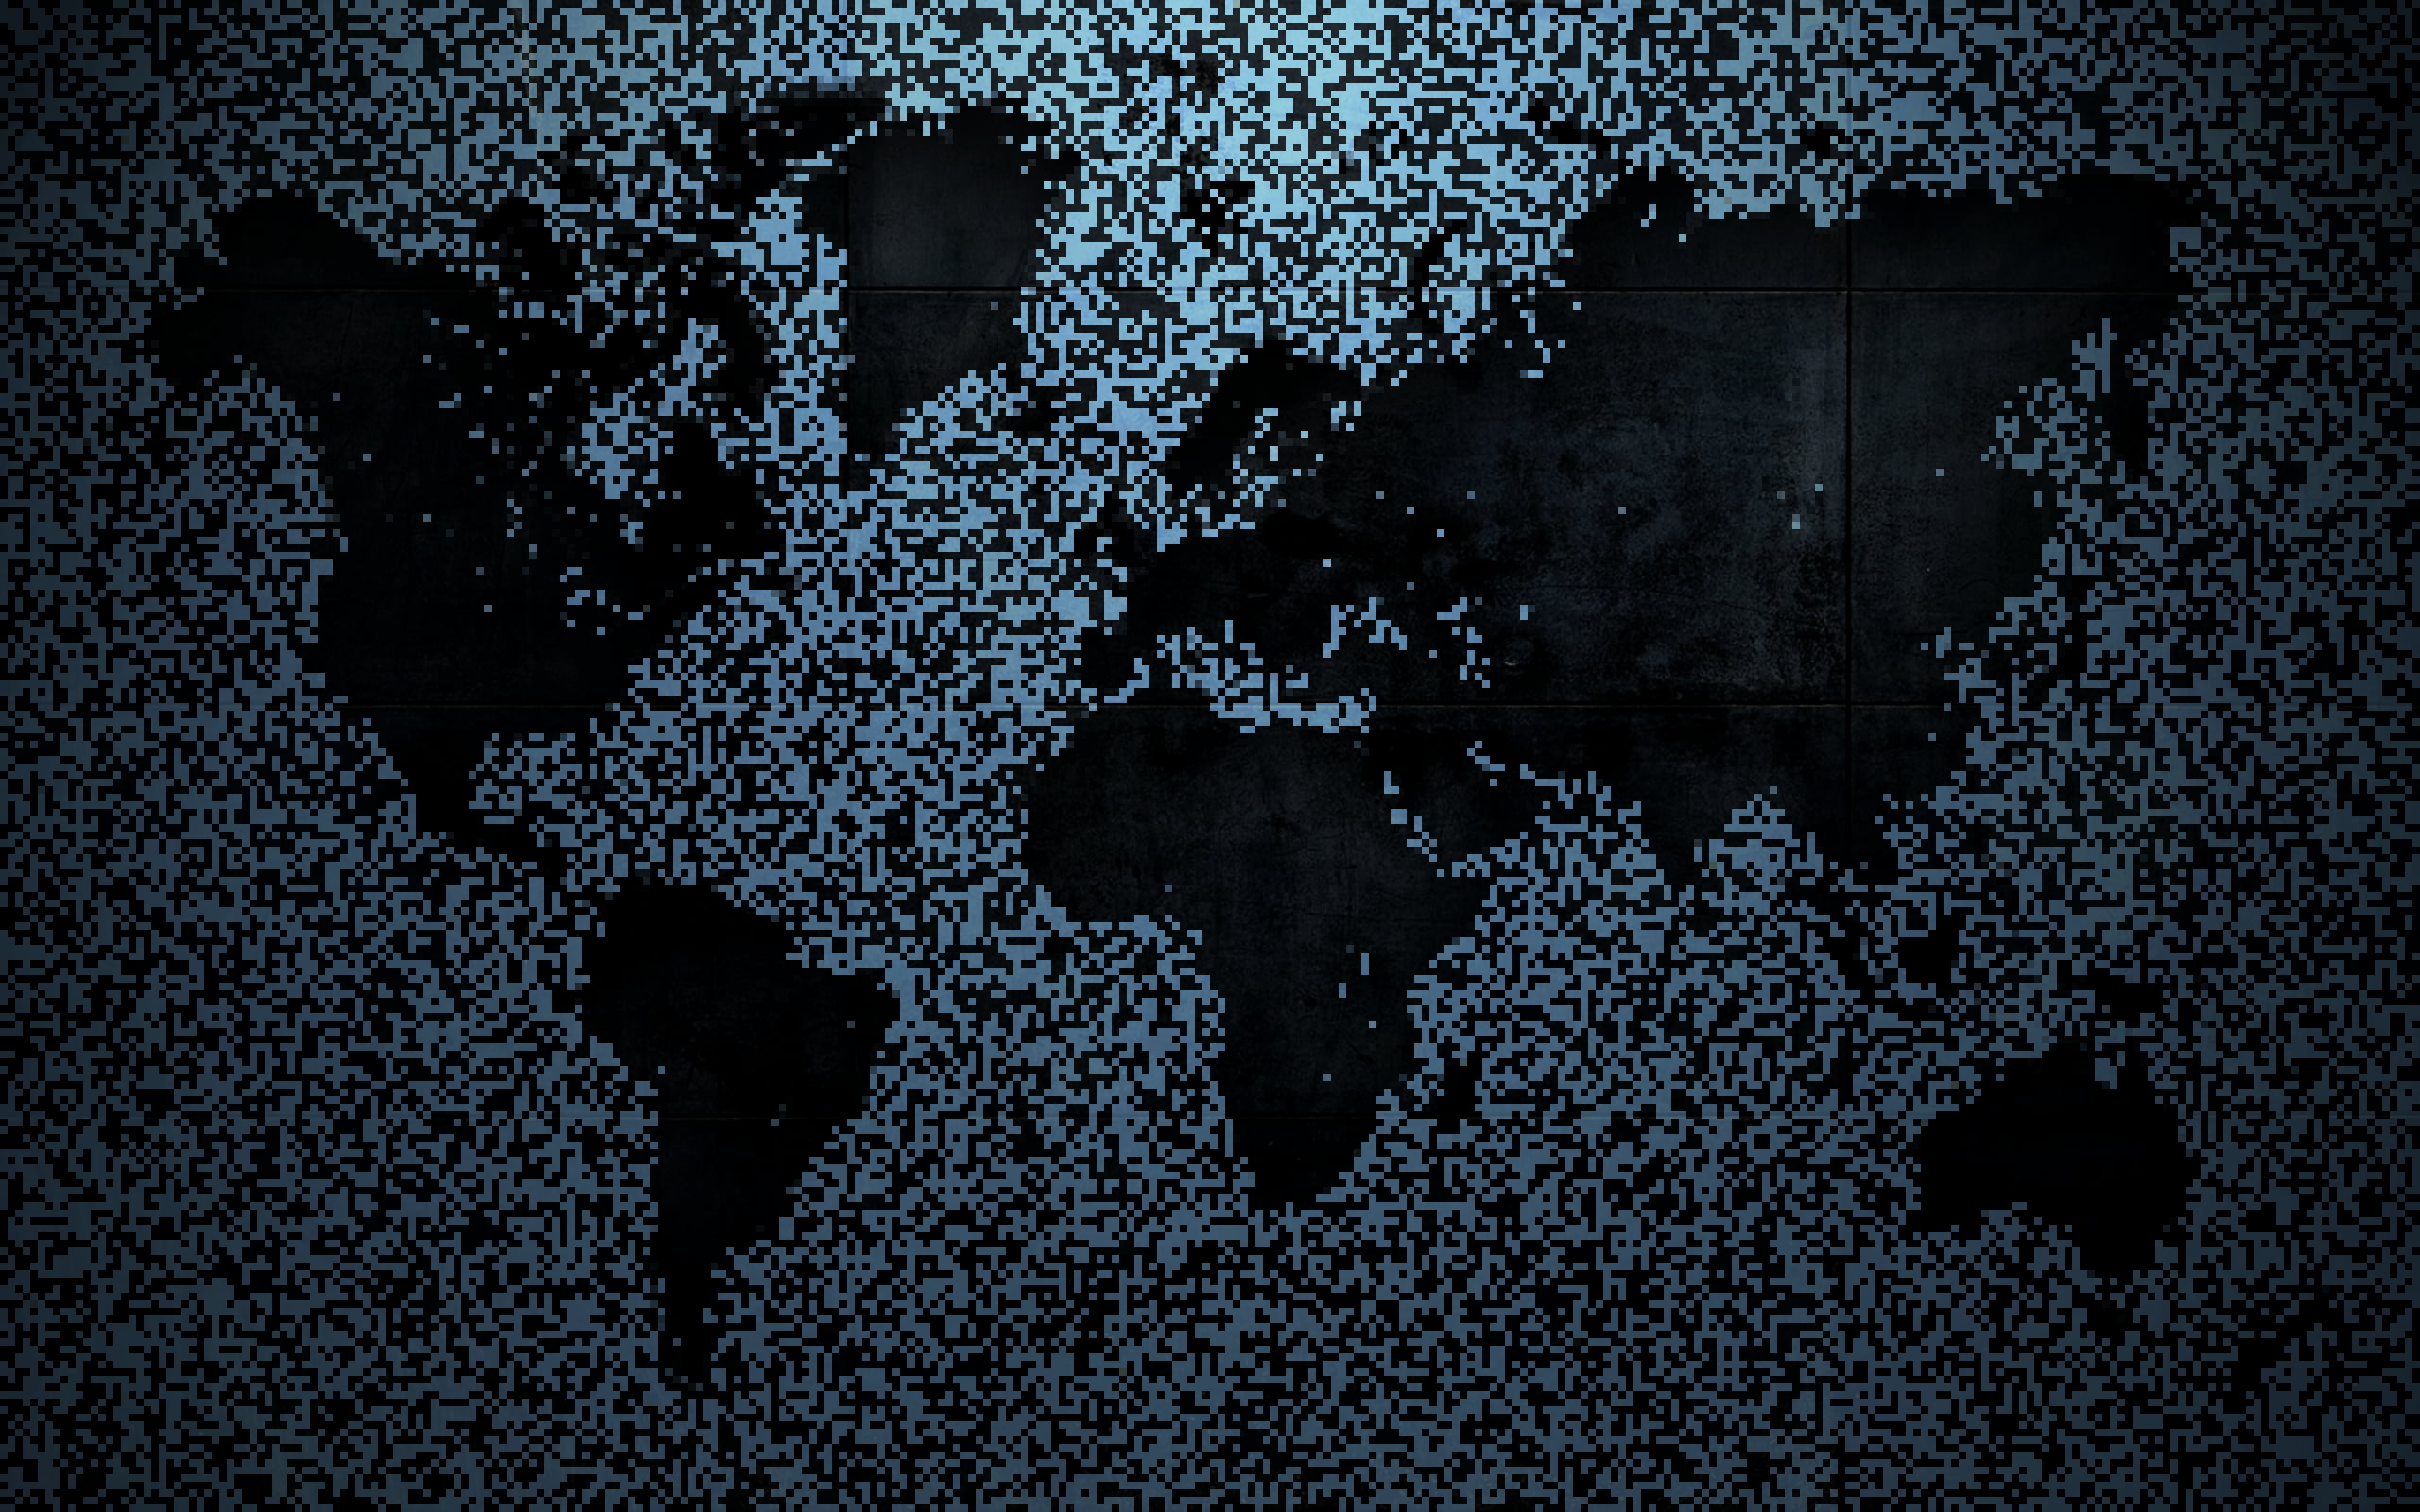 gray and black world map artwork painting